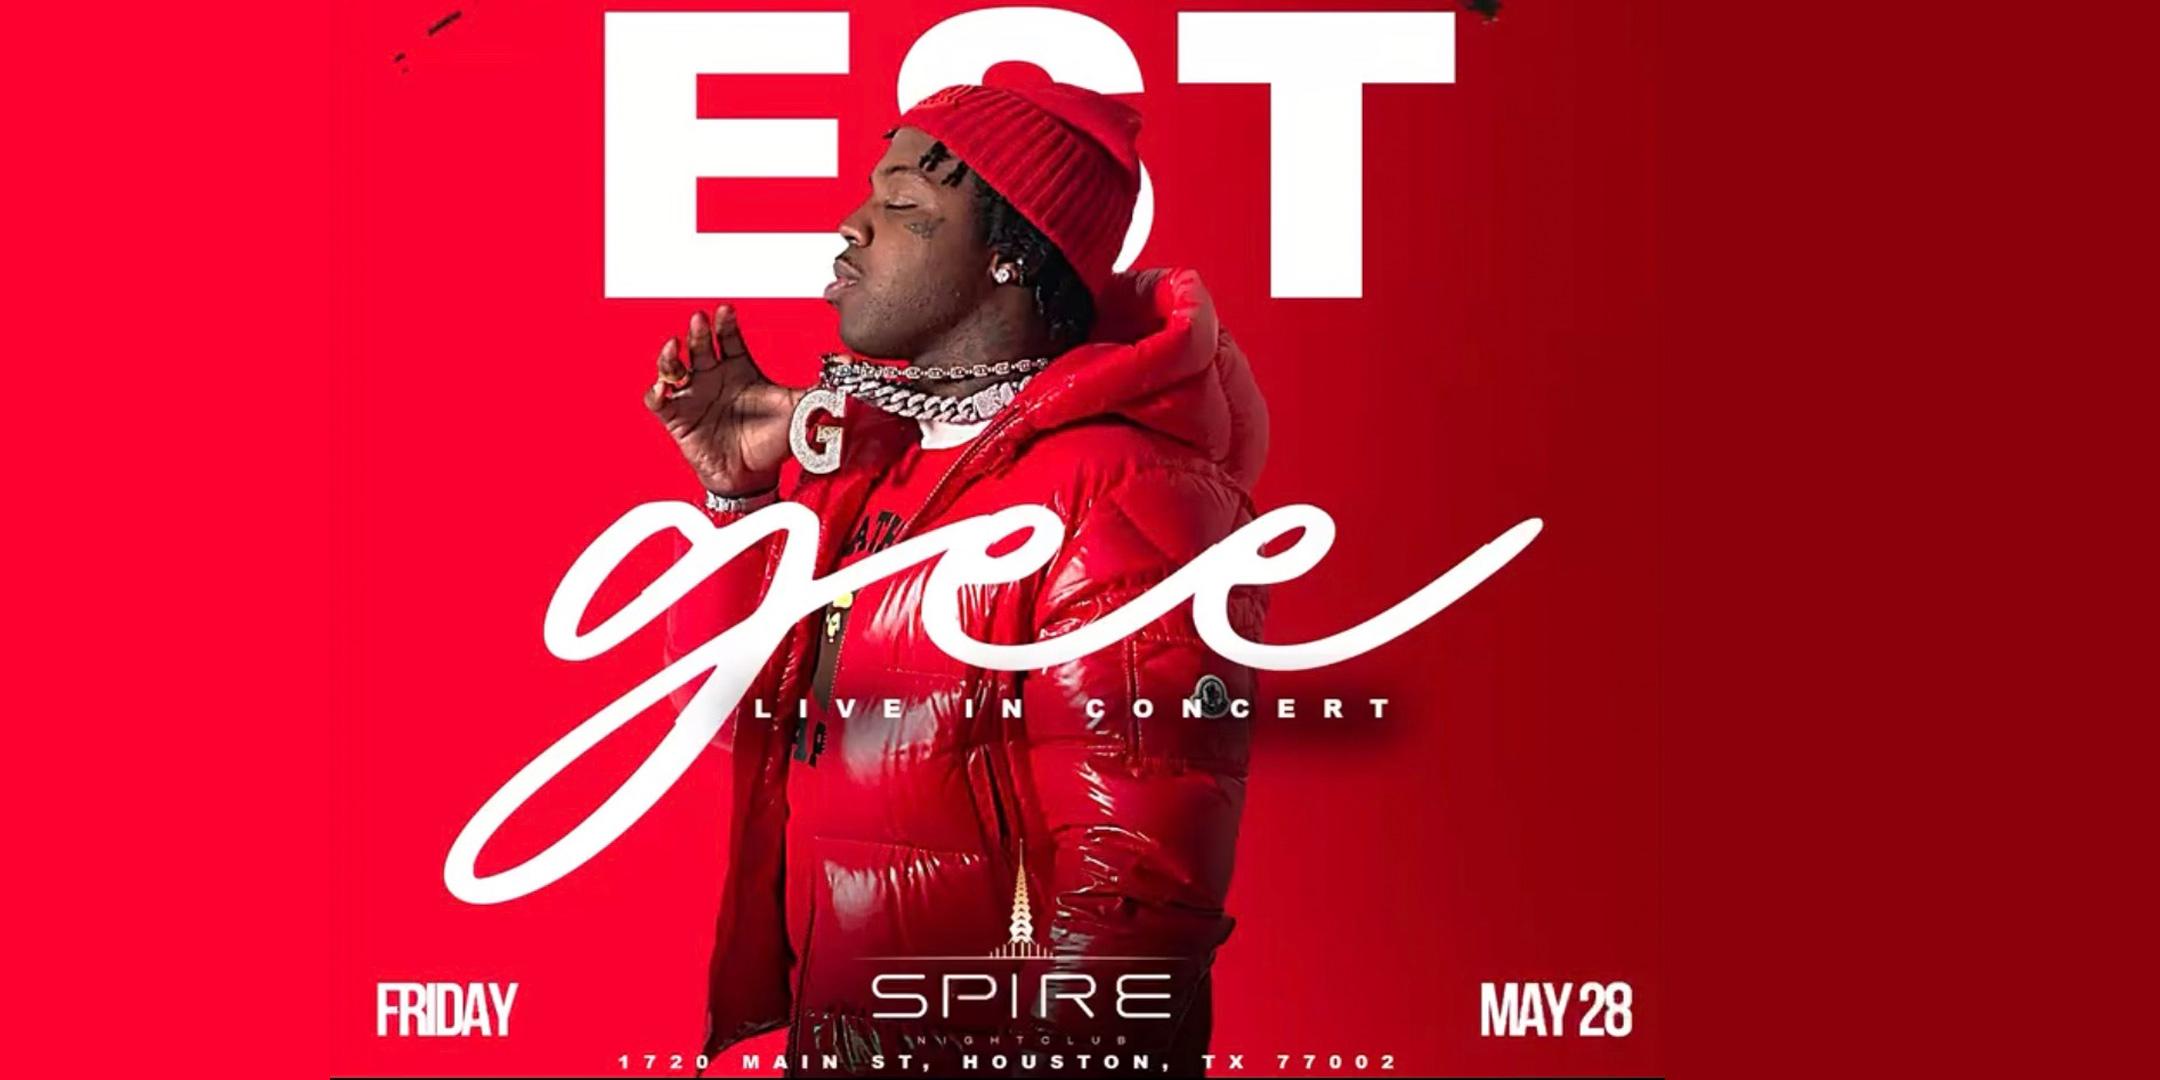 EST Gee at Spire, May 28 2021